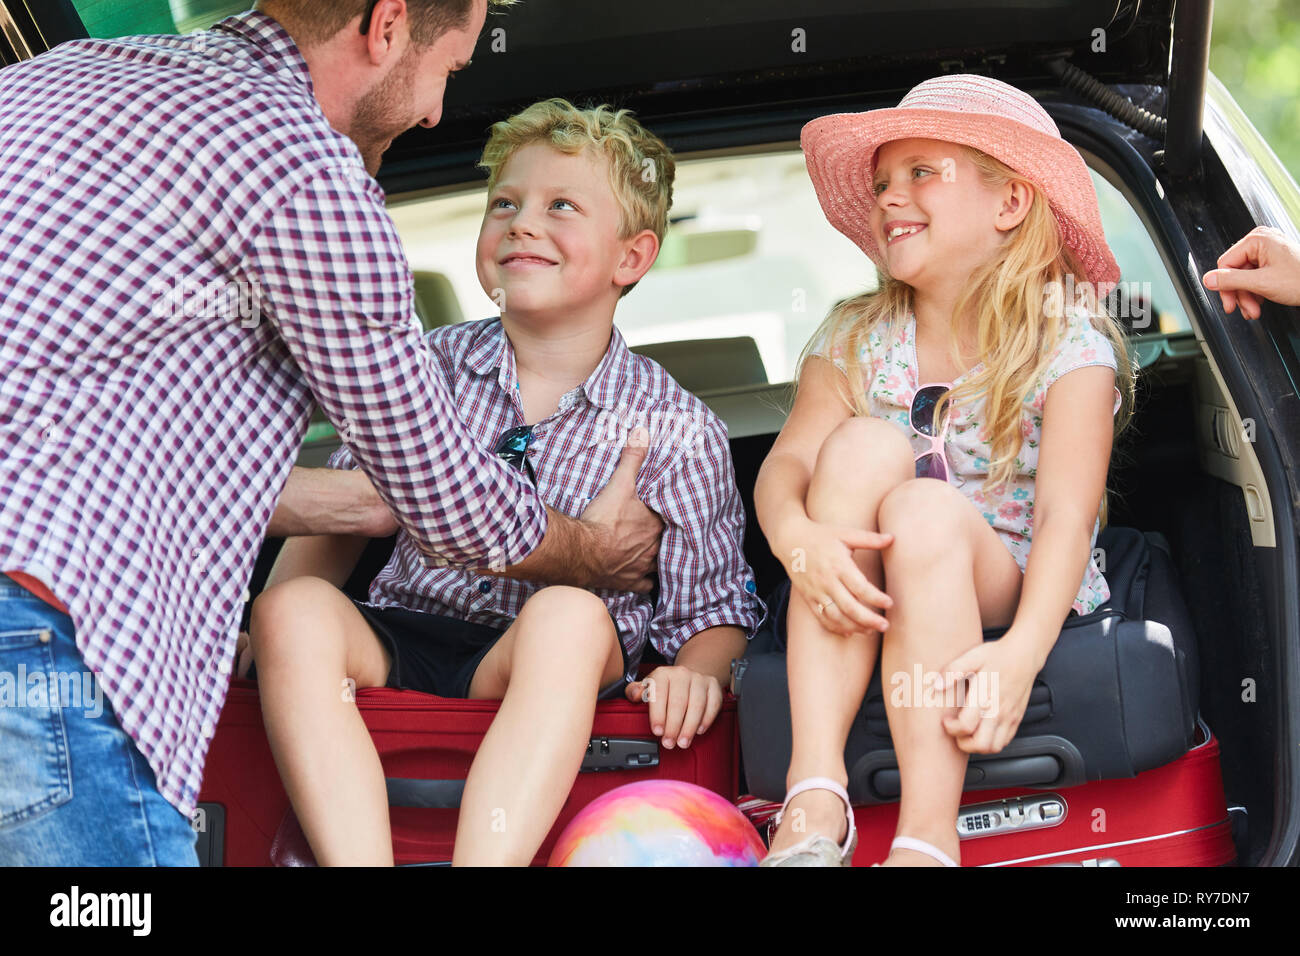 Children and father with luggage in the car together while preparing the trip Stock Photo